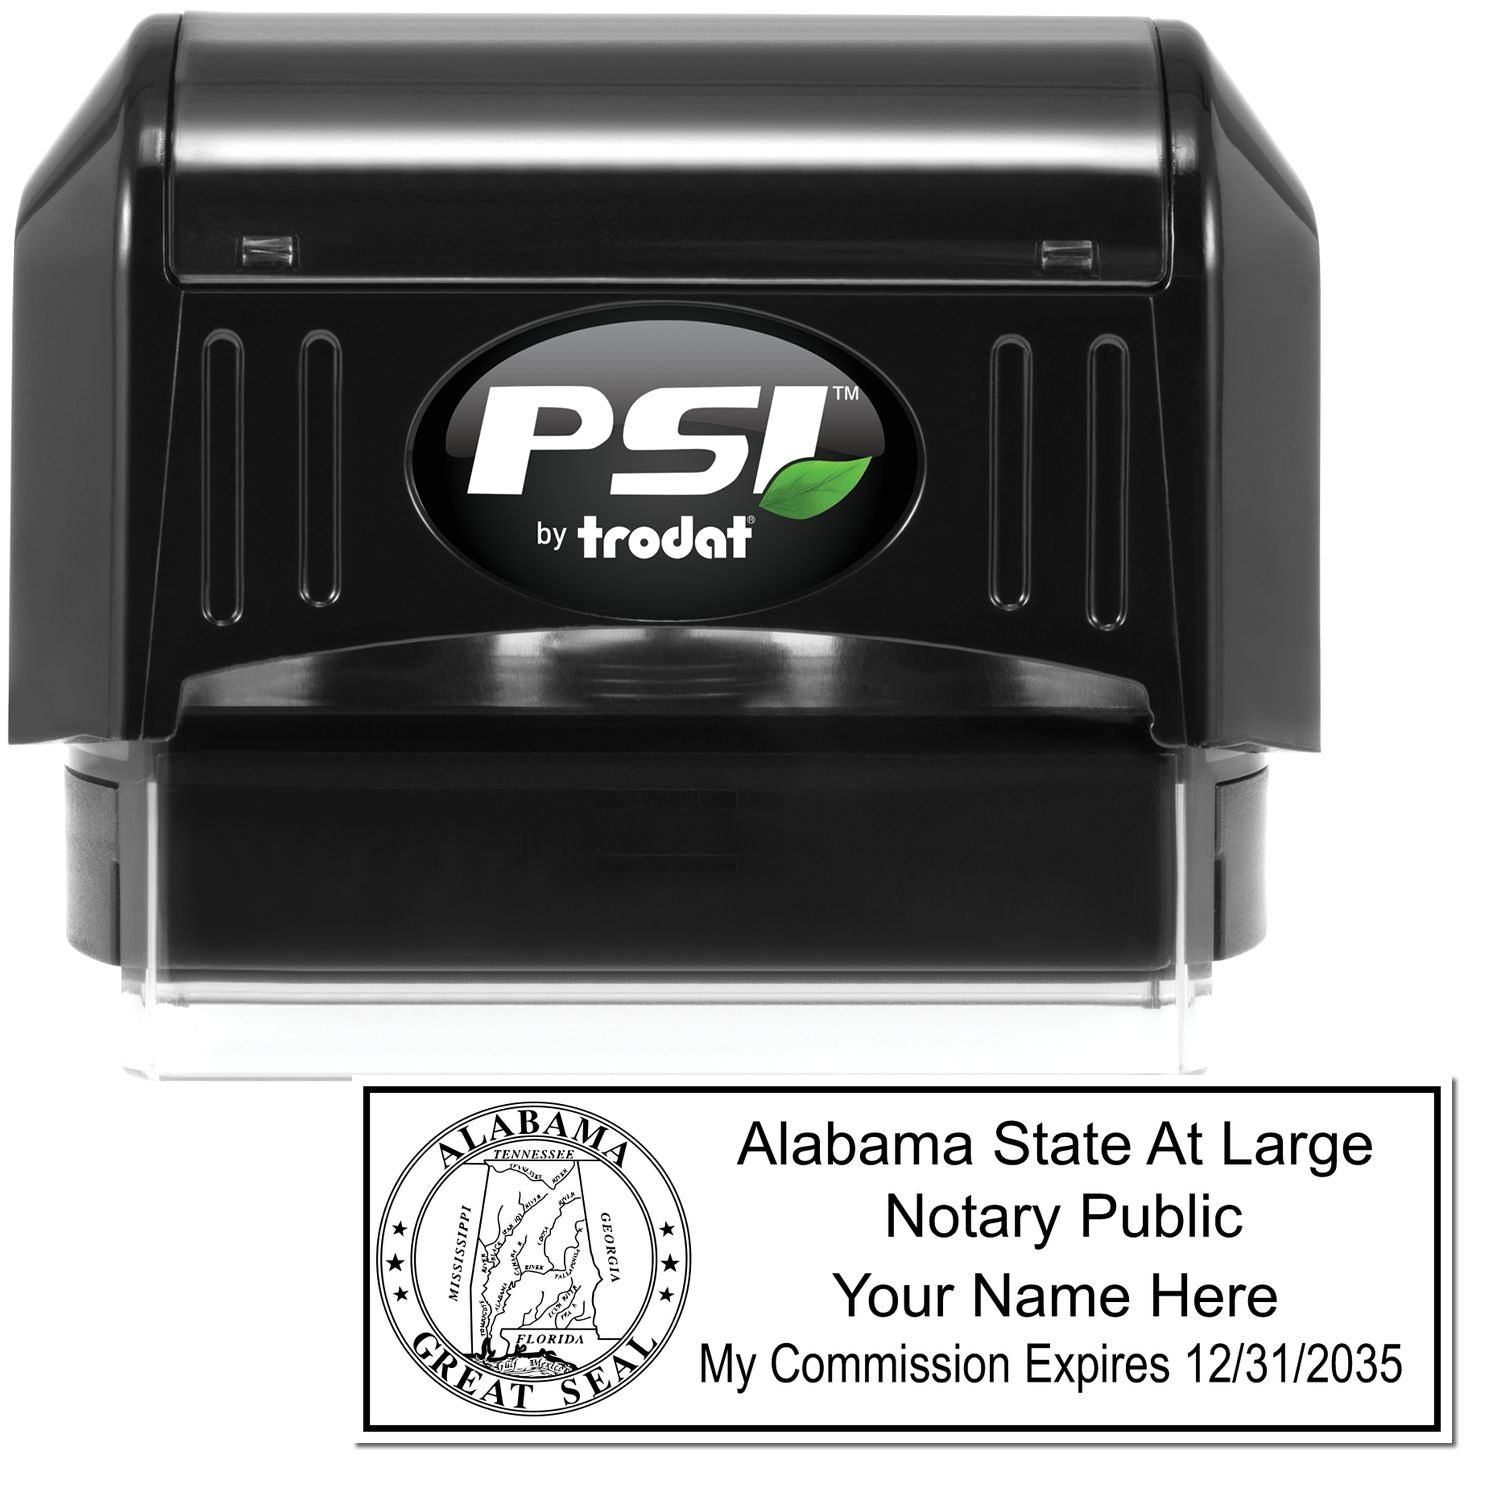 The main image for the PSI Alabama Notary Stamp depicting a sample of the imprint and electronic files